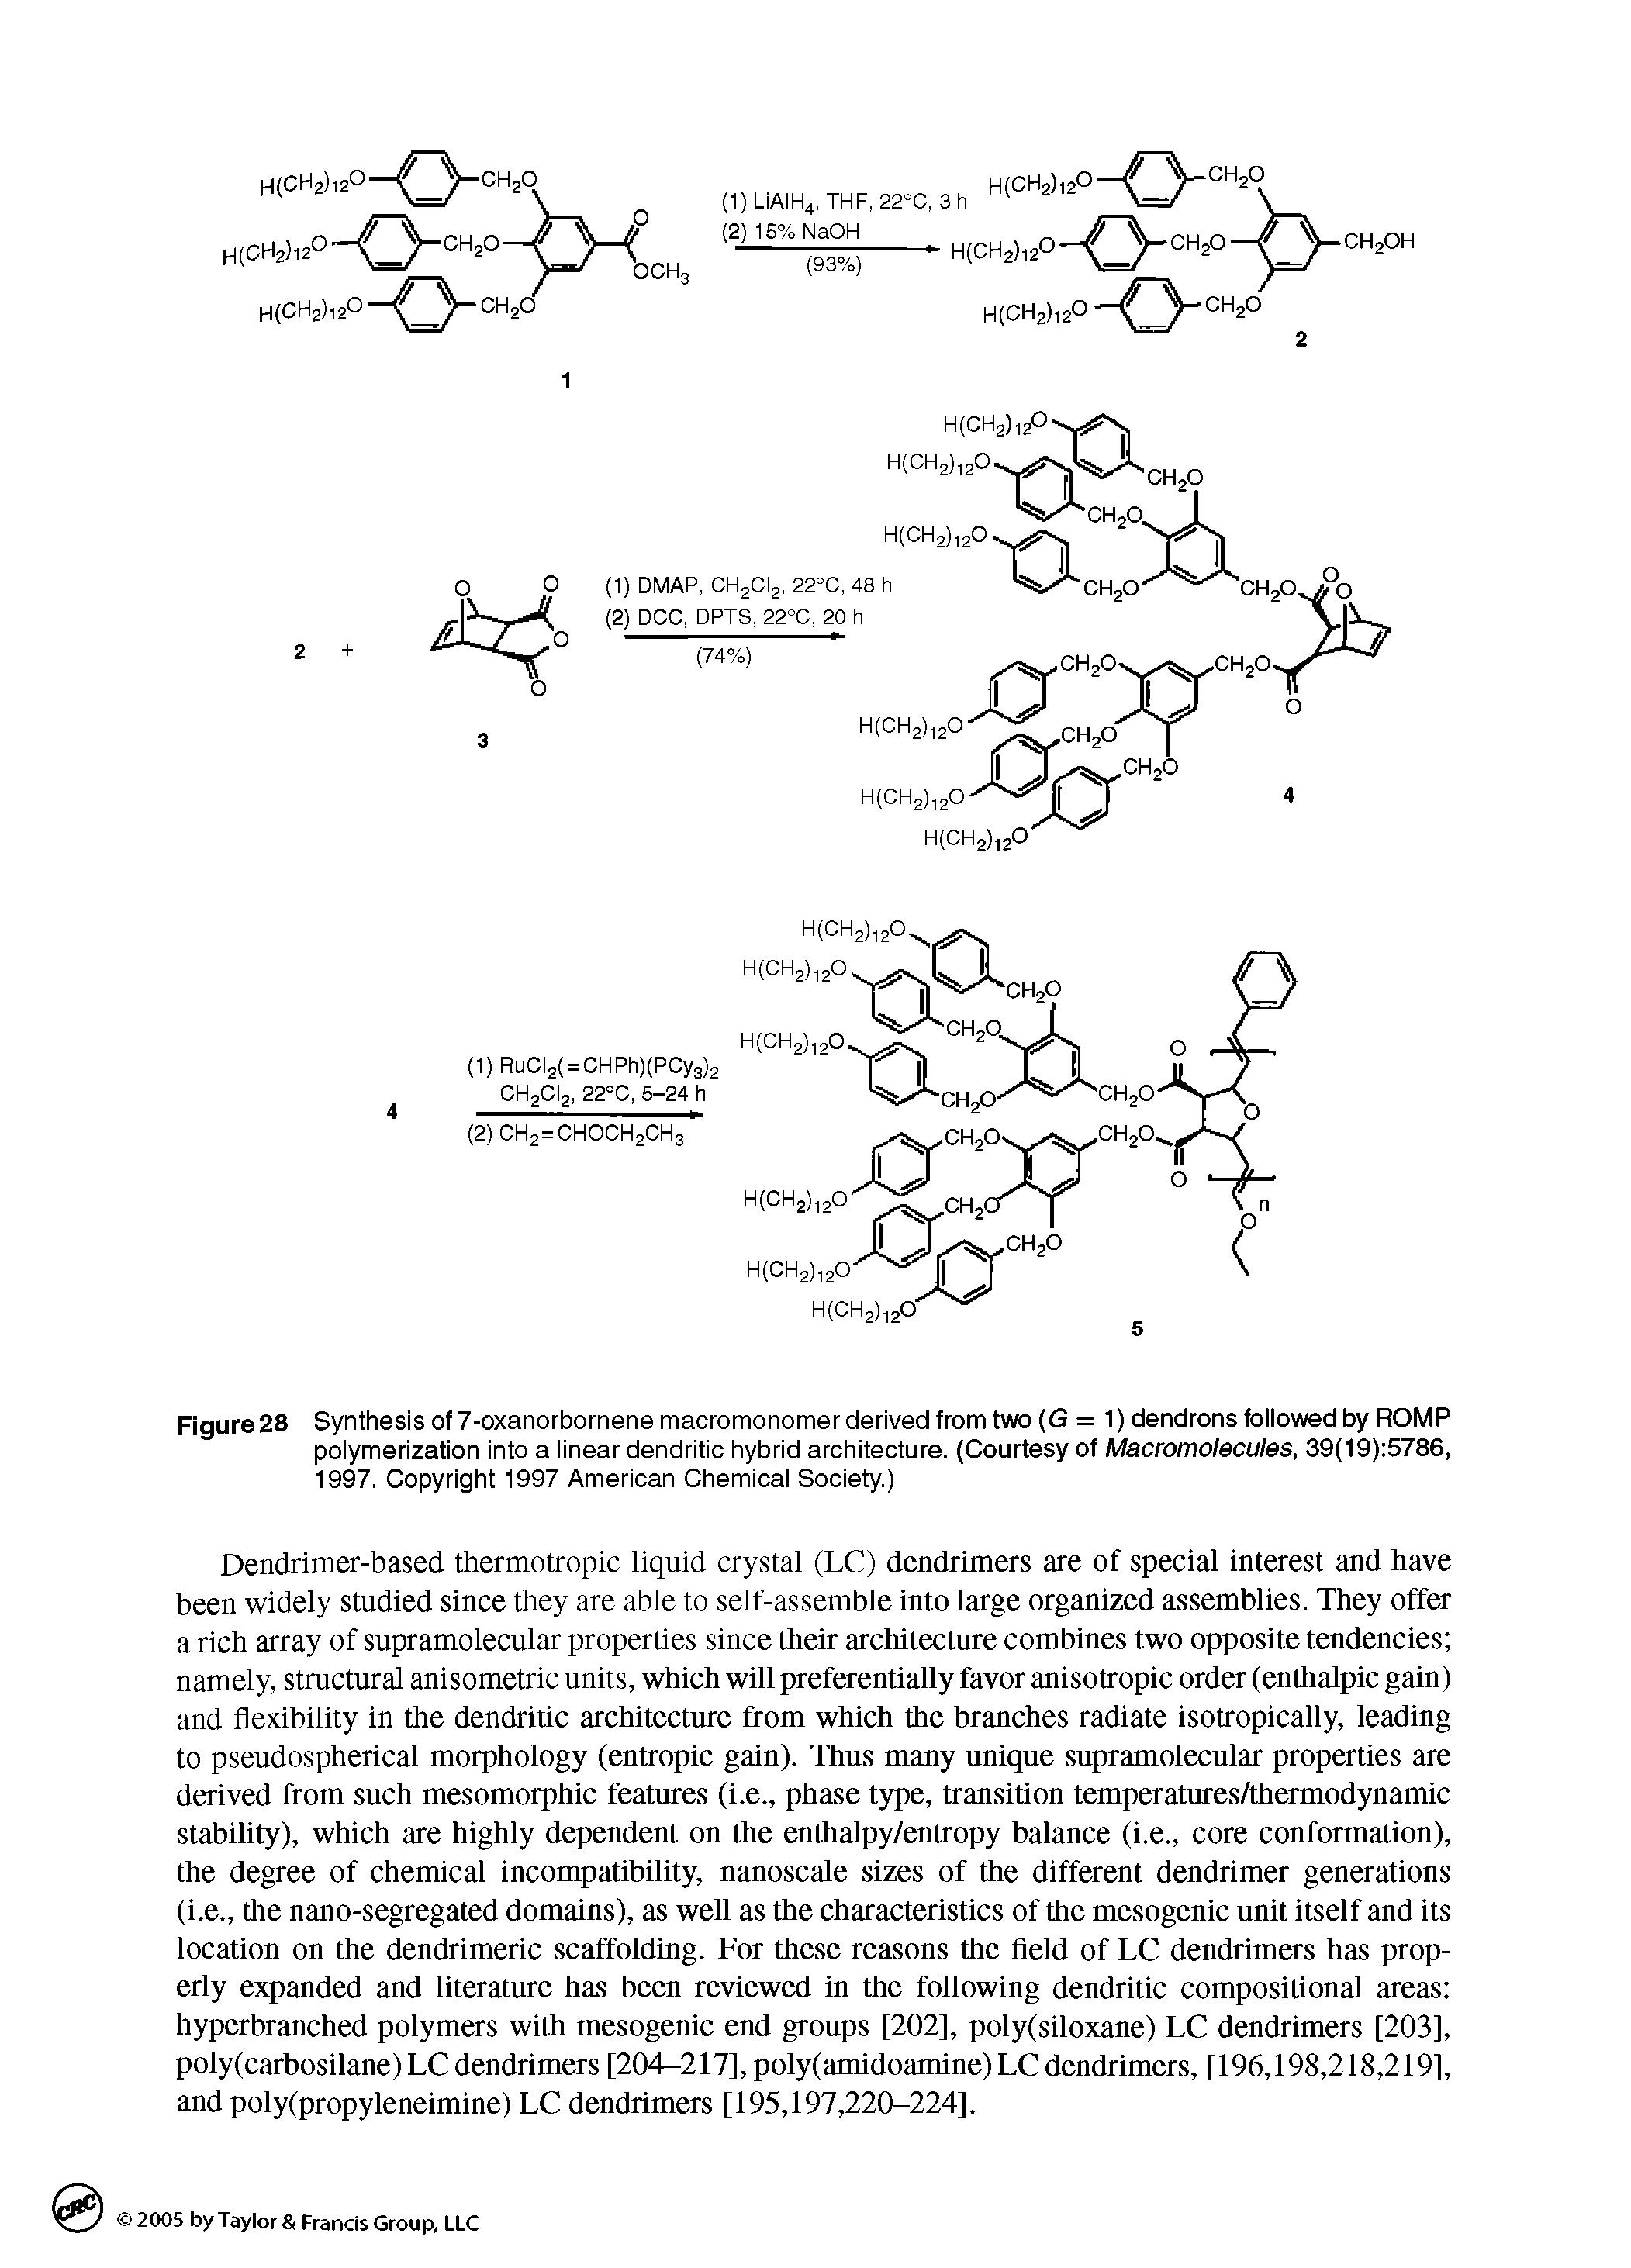 Figure 28 Synthesis of 7-oxanorbornene macromonomer derived from two (G = 1)dendronsfoiiowedby ROMP polymerization into a linear dendritic hybrid architecture. (Courtesy of Macromolecules, 39(19) 5786, 1997. Copyright 1997 American Chemical Society.)...